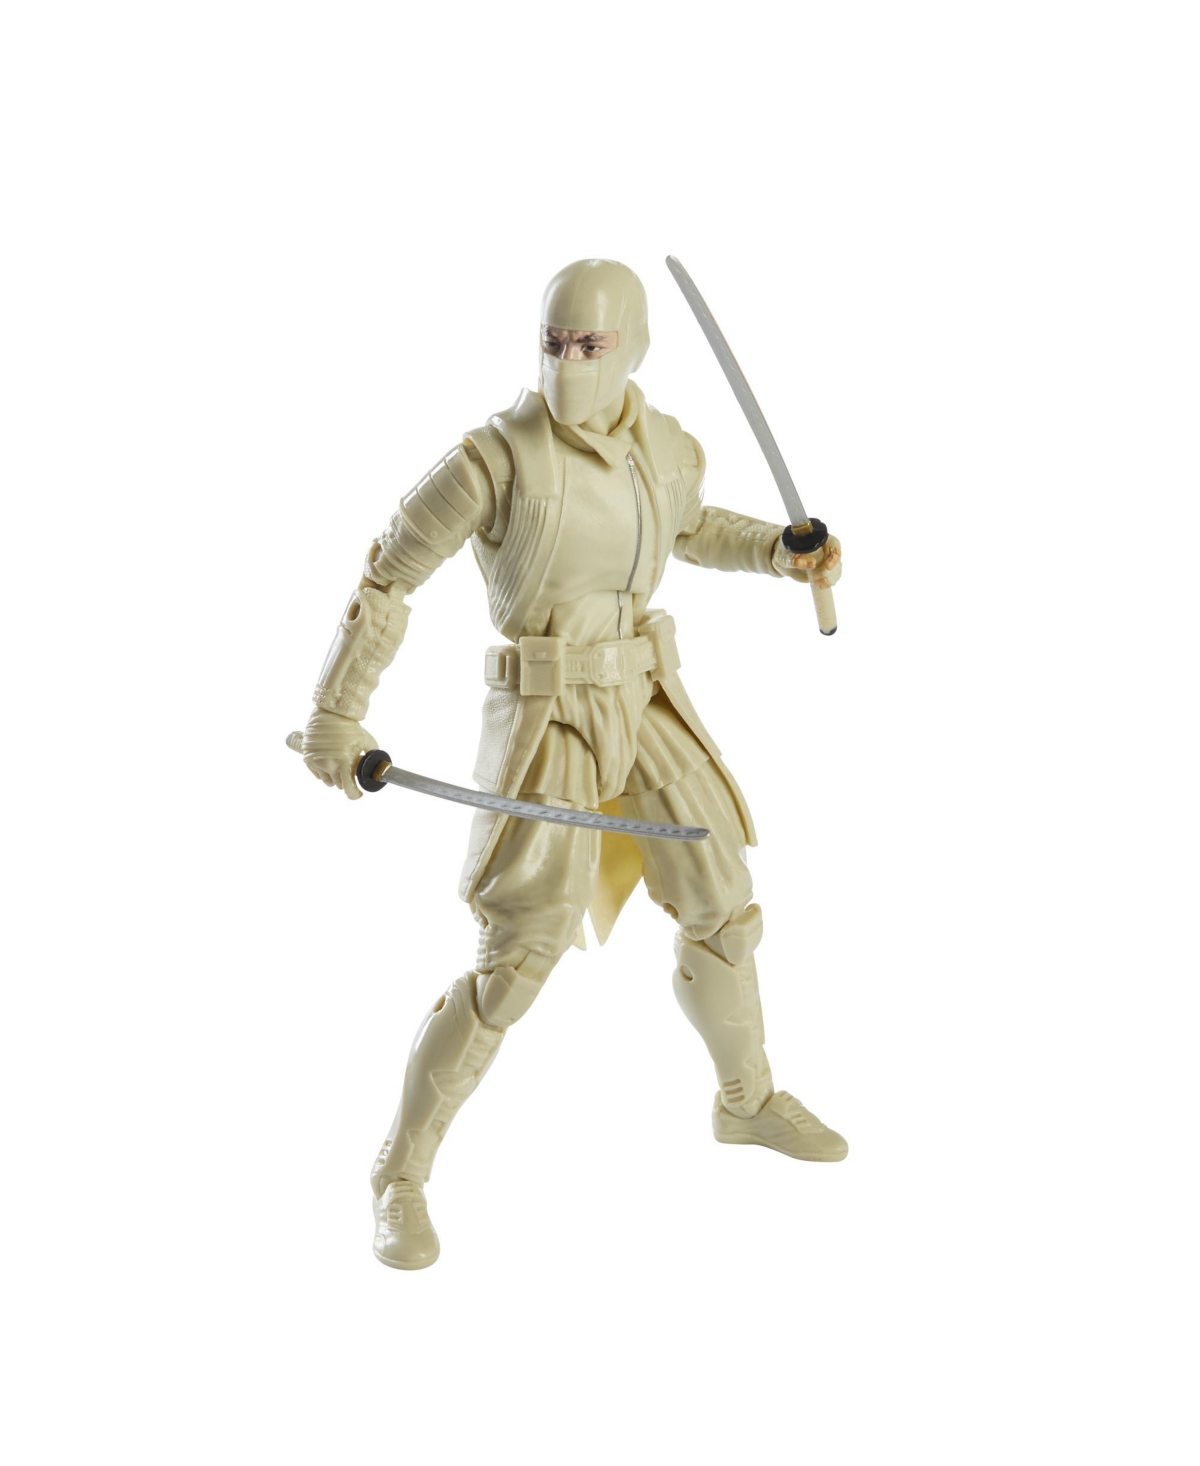 EAN 5010993736942 product image for Closeout! G.i. Joe Classified Series Storm Shadow Action Figure | upcitemdb.com